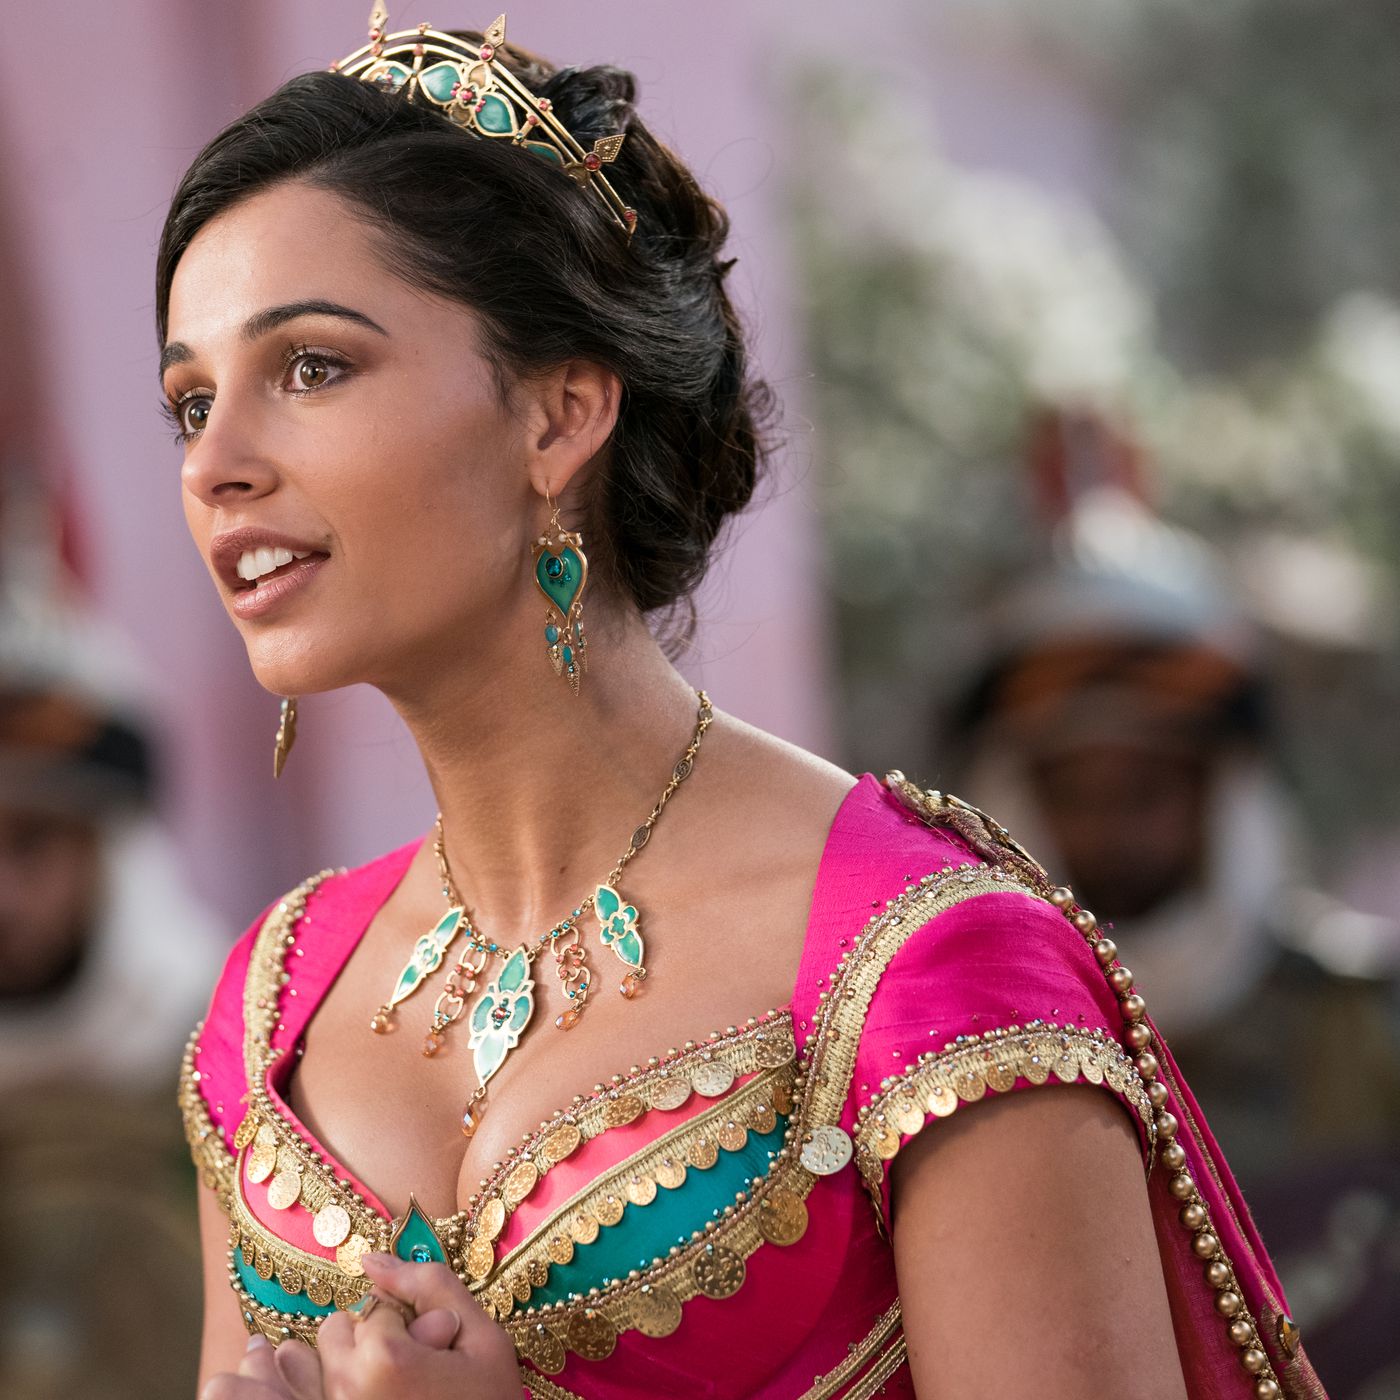 Disney finally gets the 'updated' princesses right with Aladdin's Jasmine